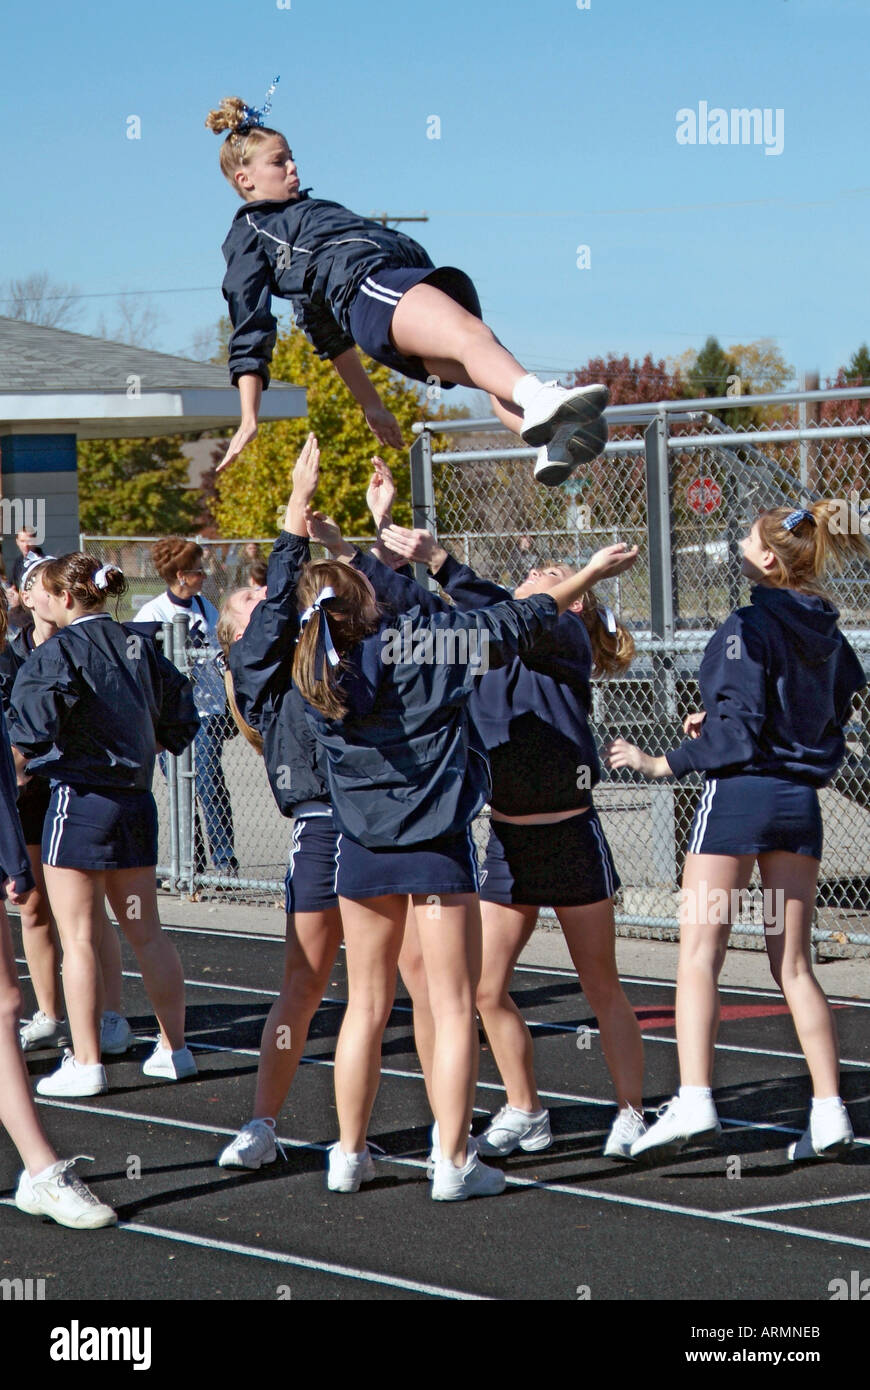 High School cheerleaders perform complicated and sometimes dangerous maneuvers during presentation at a football game Stock Photo